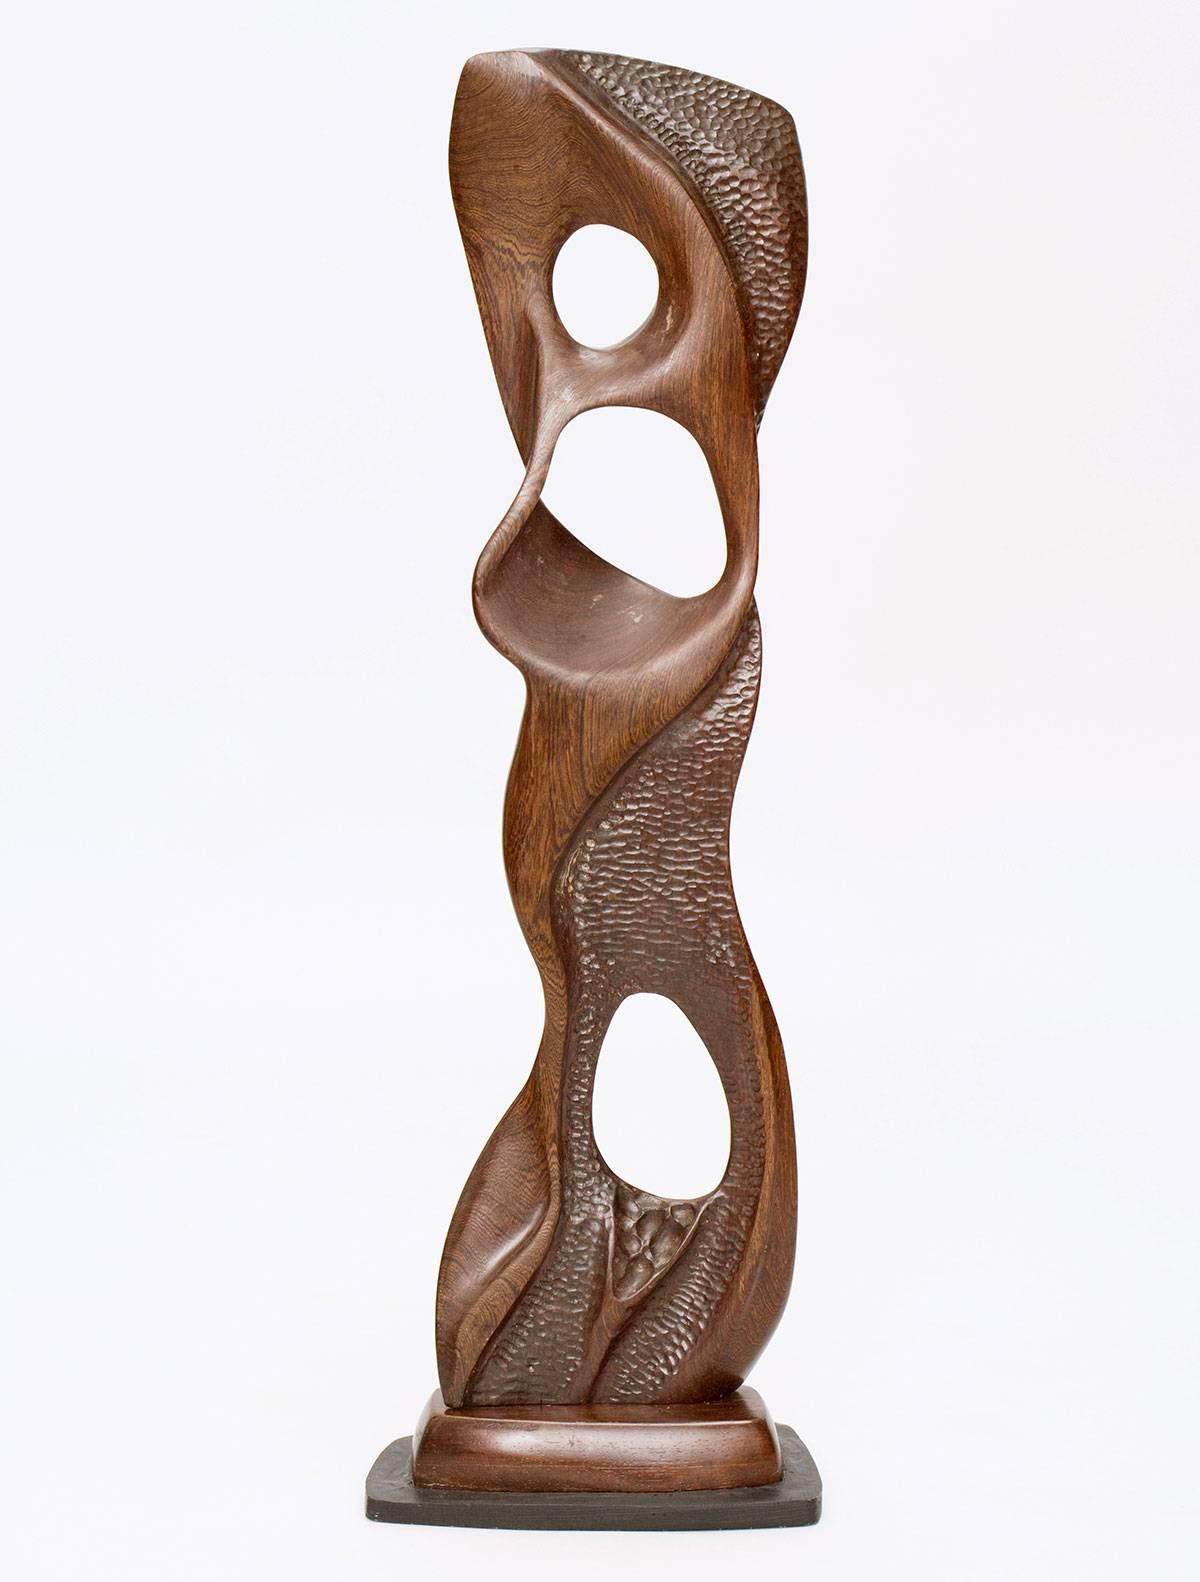 Expertly carved, biomorphic black walnut wood sculpture on artist’s stand by acclaimed New Hope, Pennsylvania sculptor E. Newell Weber. The liquid-like piece is finely textured on one side and smooth on the other. Partially signed.